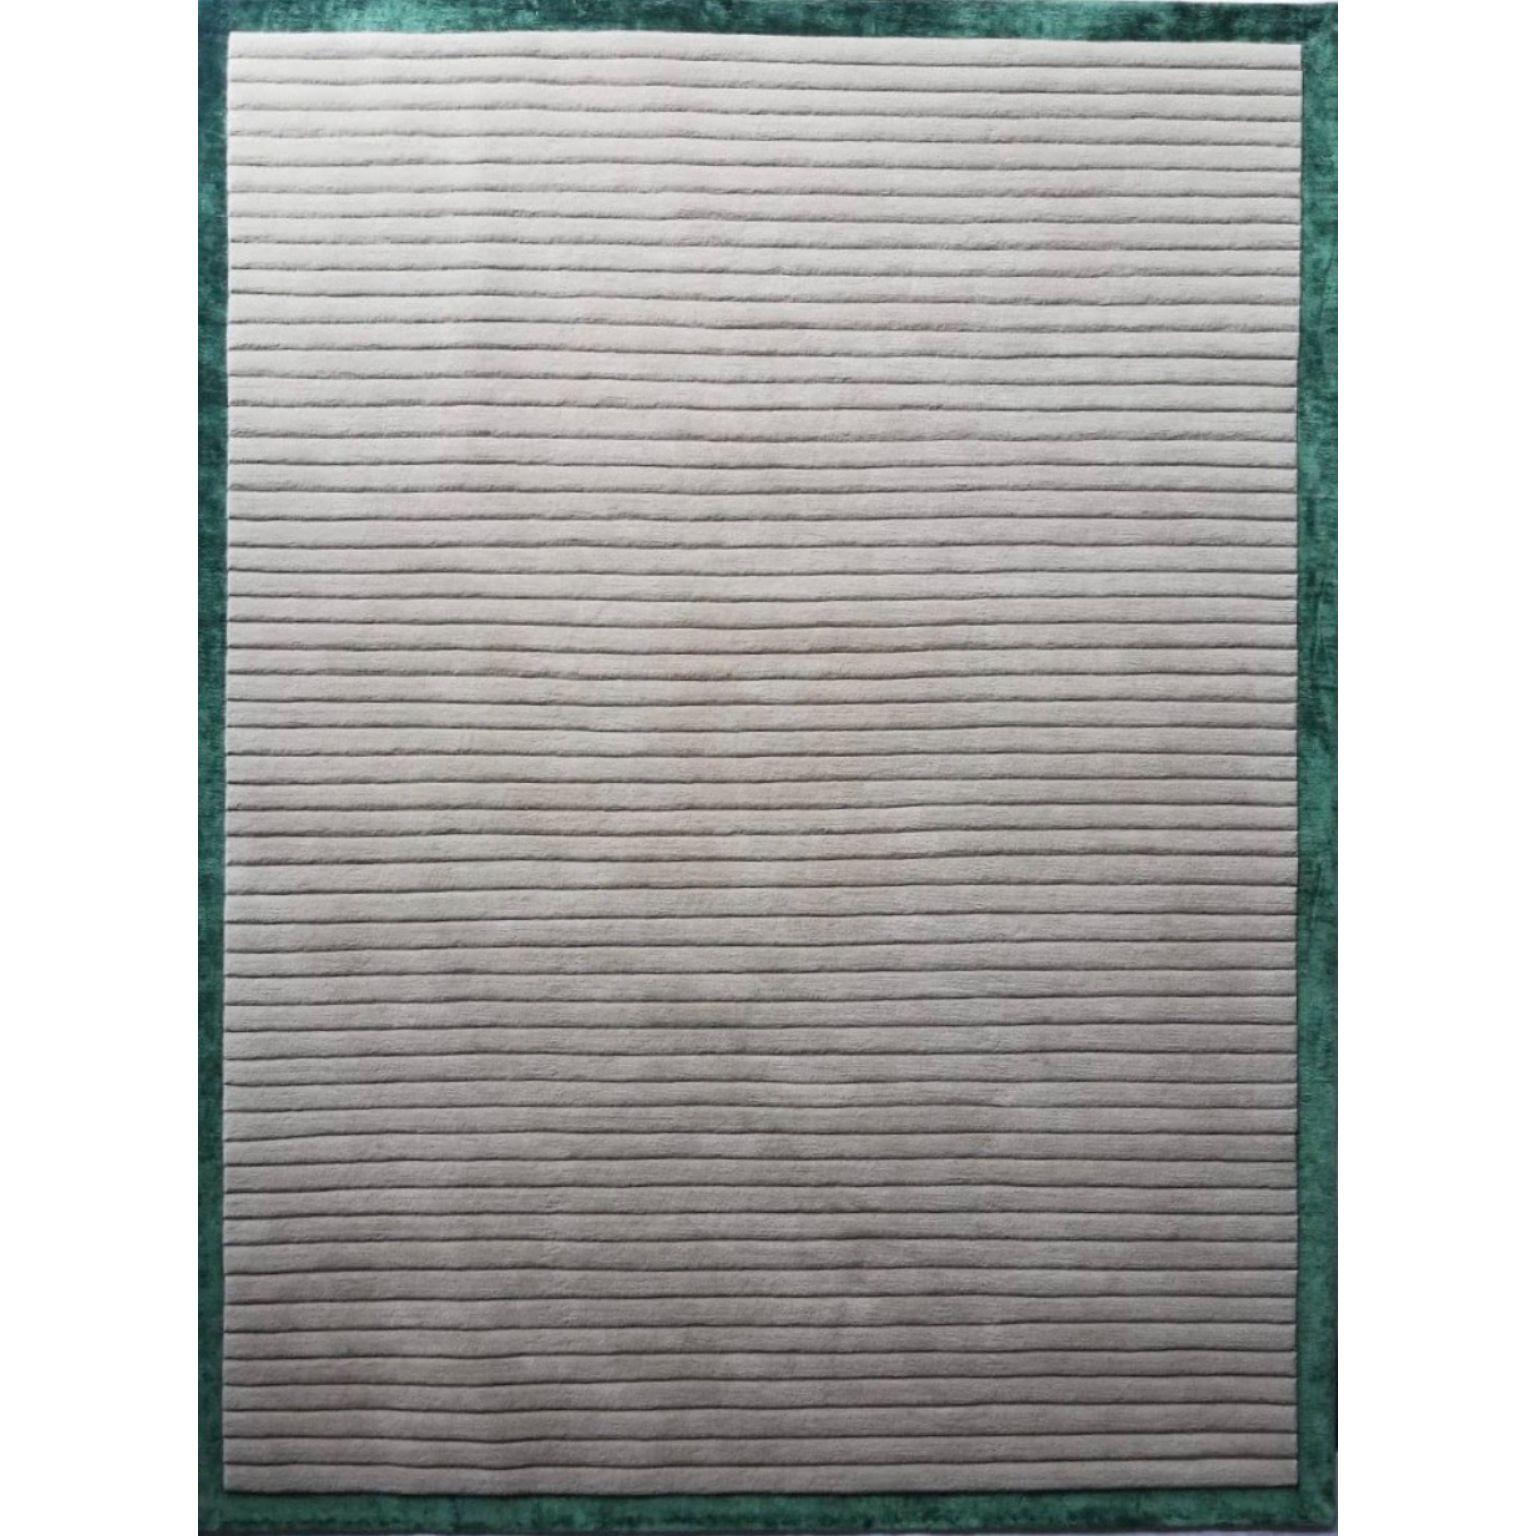 Corduroy Framed small rug by Art & Loom
Dimensions: D 243.4 x H 304.8 cm
Materials: New Zealand wool & Chinese silk
Quality (Knots per Inch): 100
Also available in different dimensions.

Samantha Gallacher has always had a keen eye for